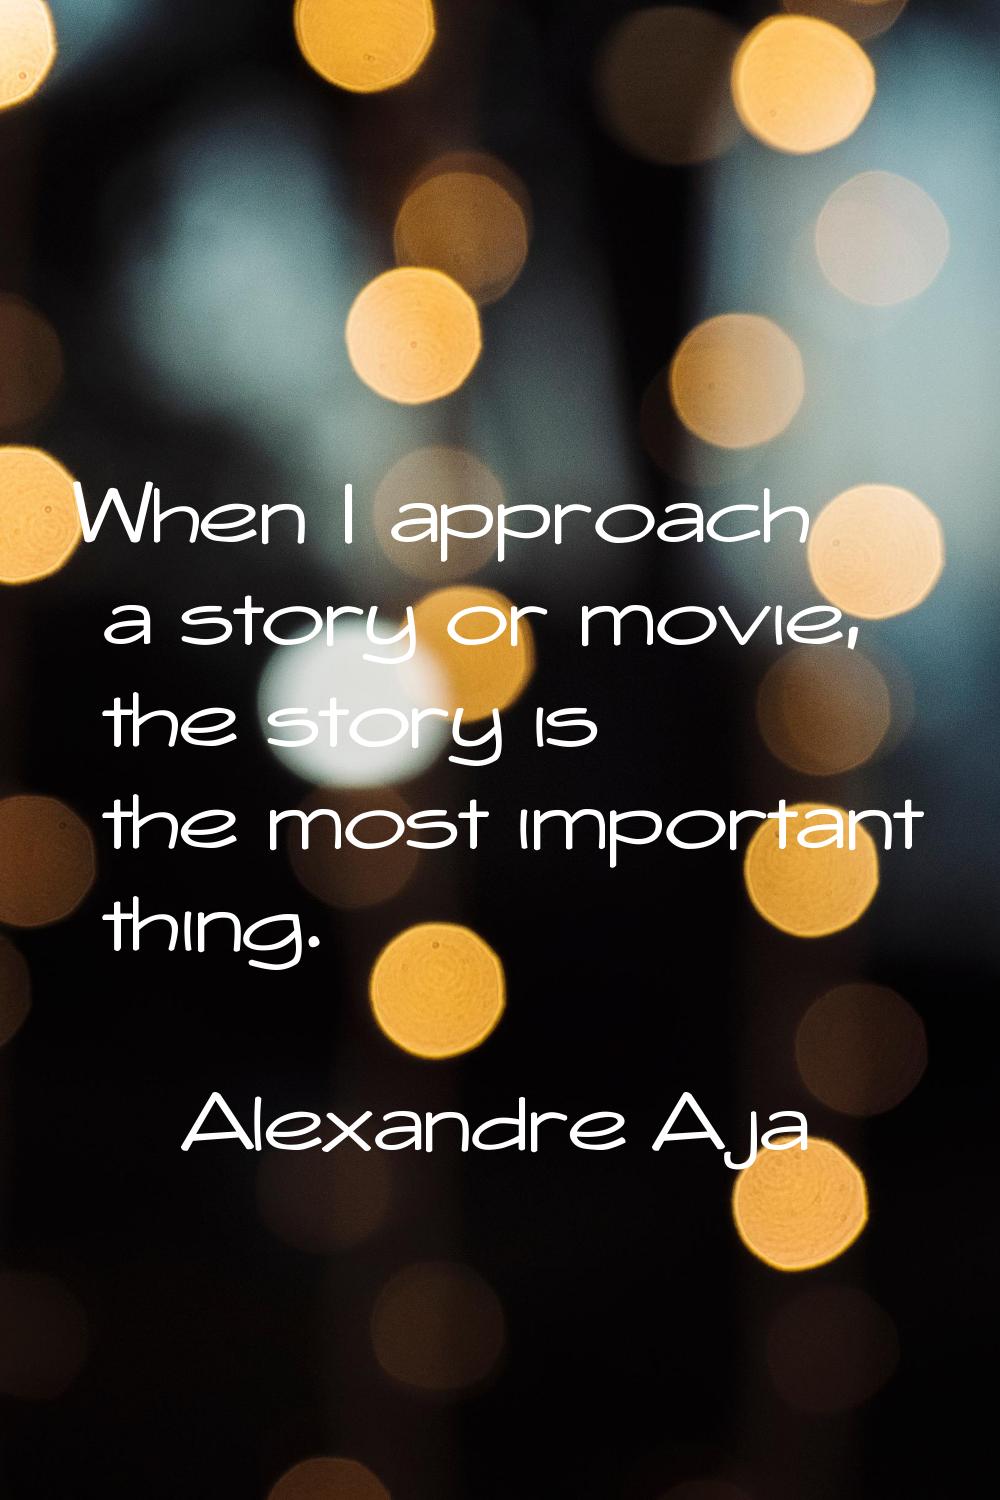 When I approach a story or movie, the story is the most important thing.